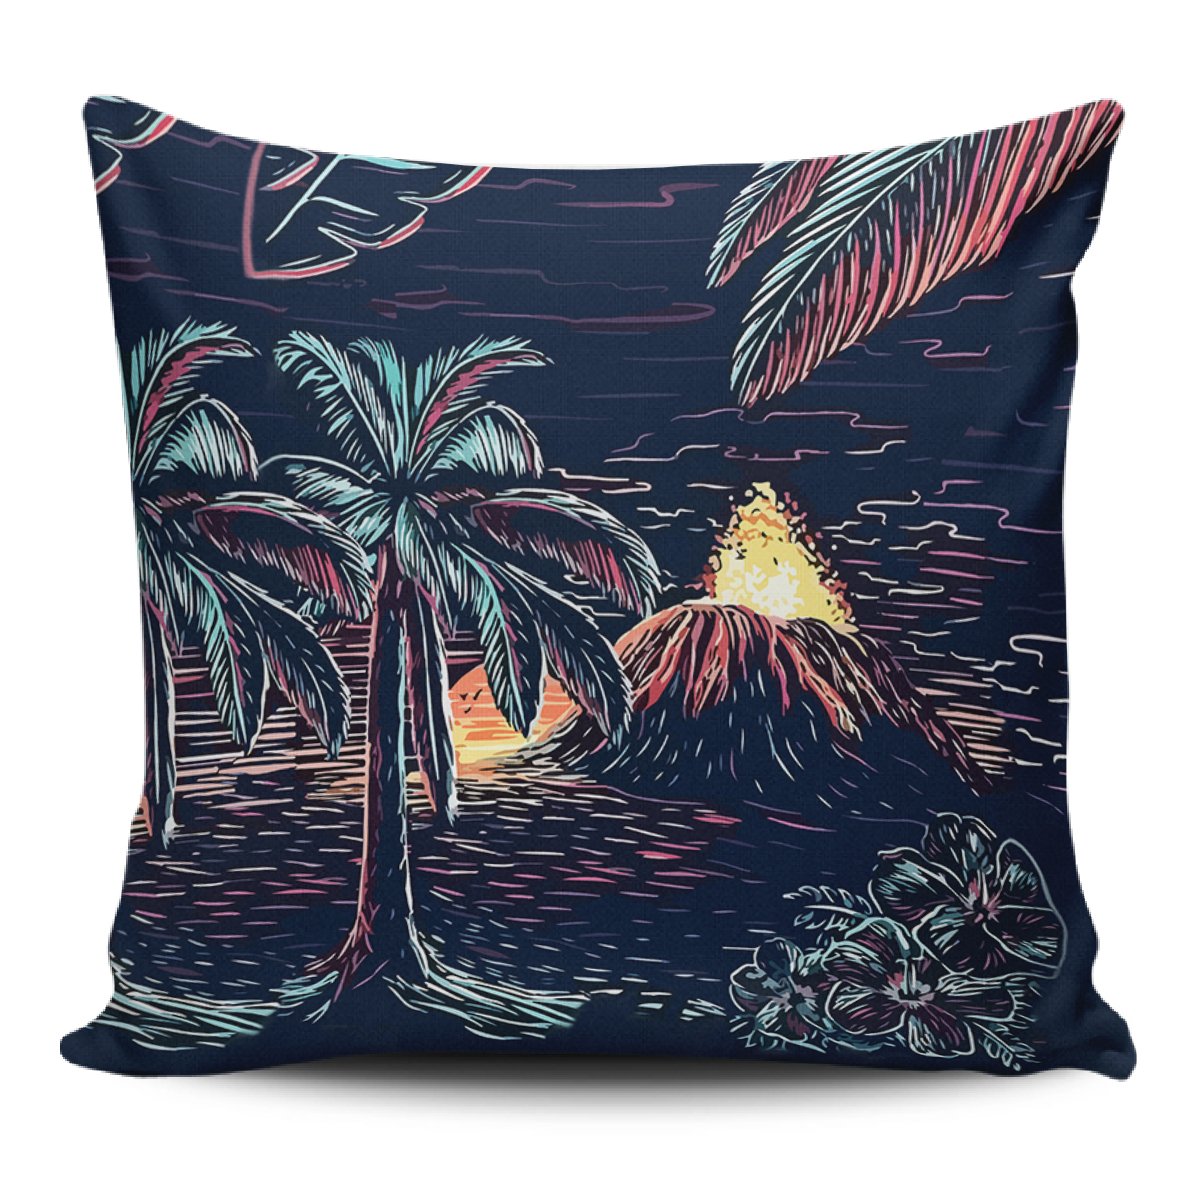 Night On The Land Pillow Covers One Size Zippered Pillow Case 18"x18"(Twin Sides) Black - Polynesian Pride